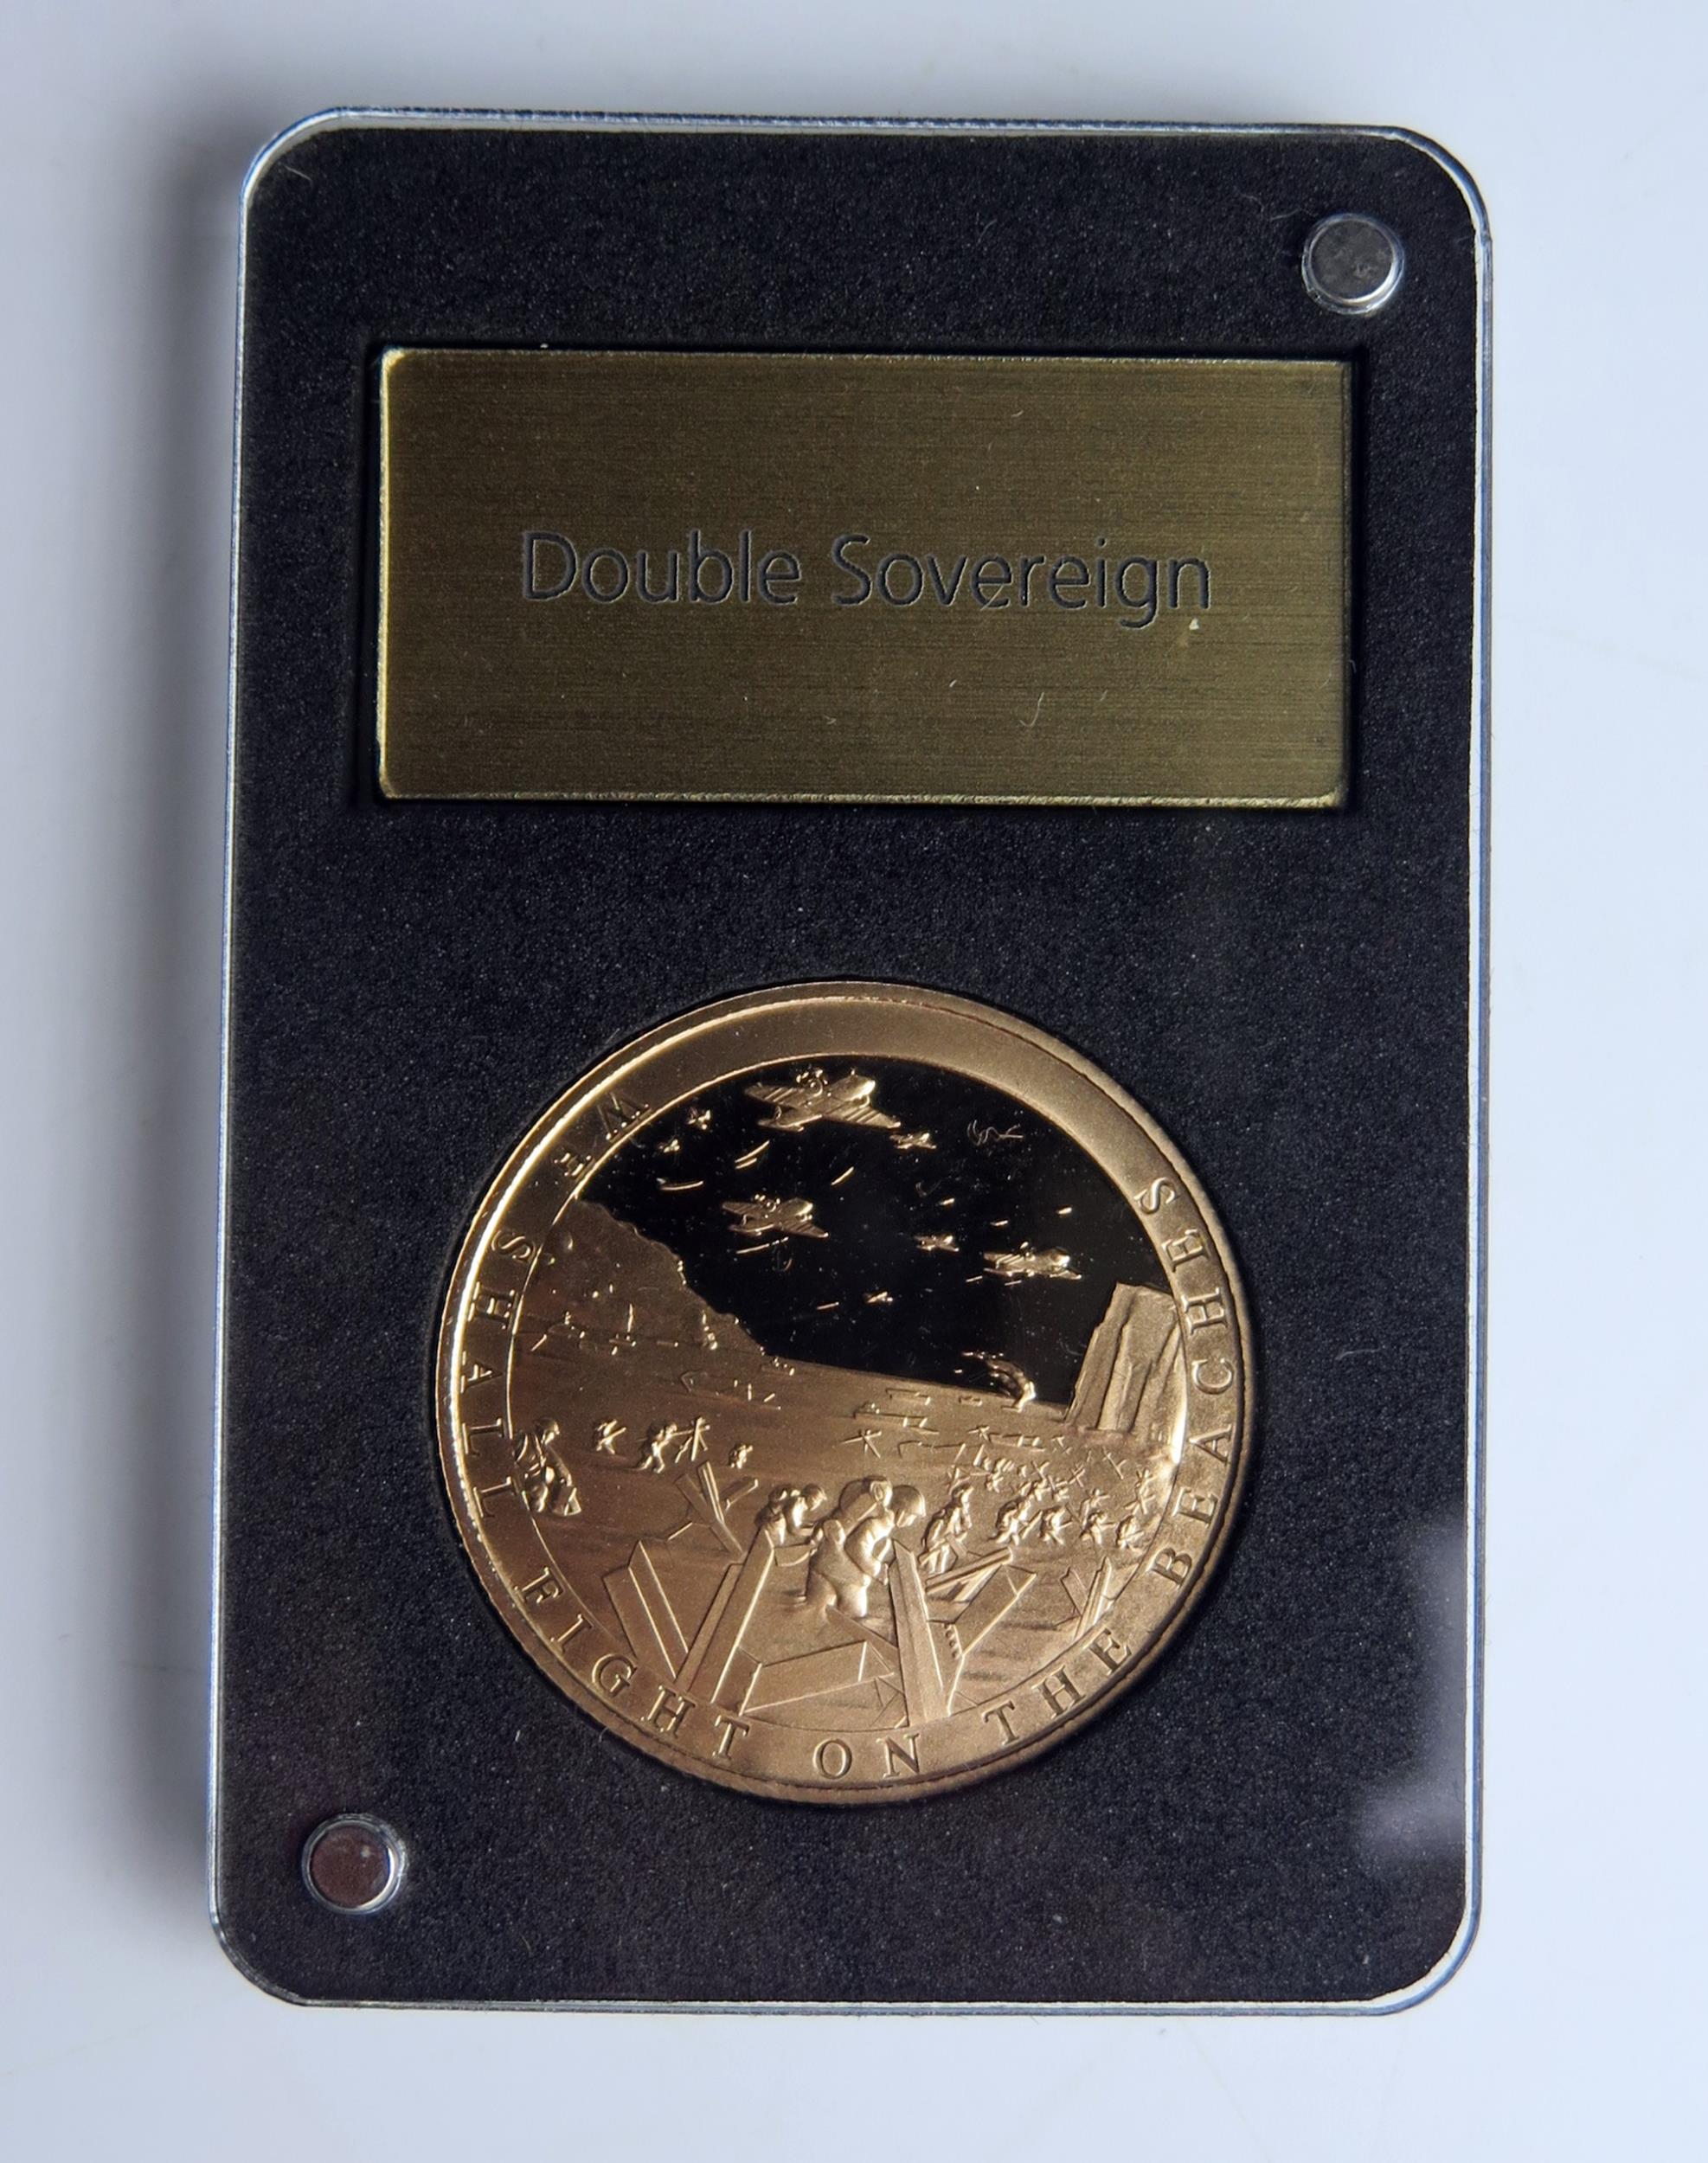 A Boxed 2019 Double Sovereign _We Shall Fight on The Beaches, 15.98g - Image 2 of 3